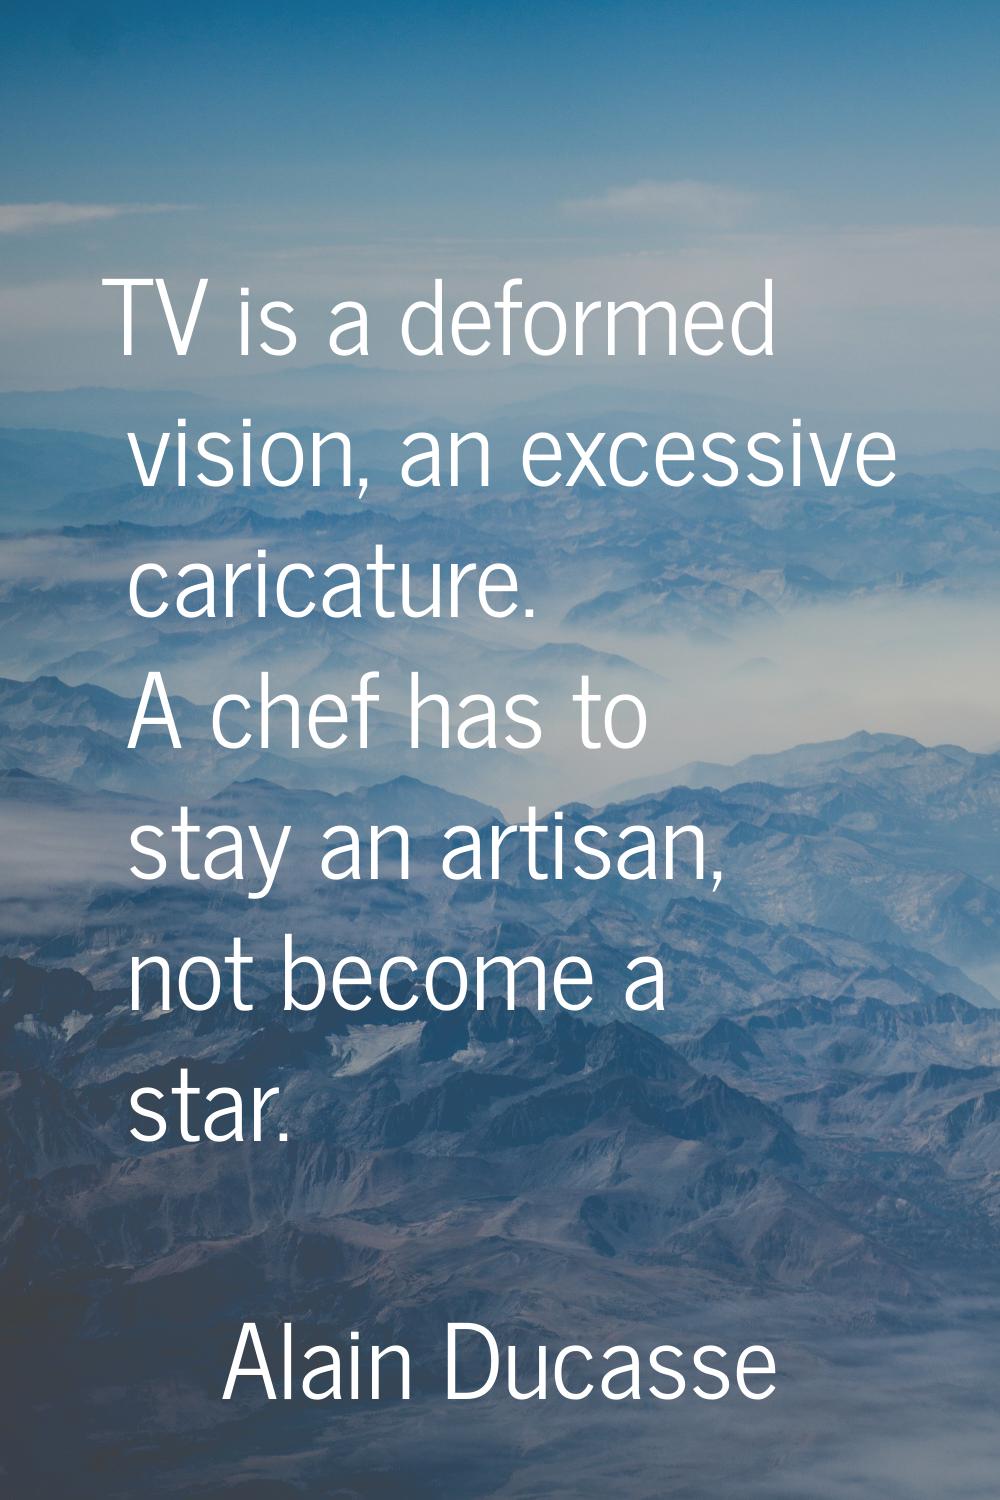 TV is a deformed vision, an excessive caricature. A chef has to stay an artisan, not become a star.